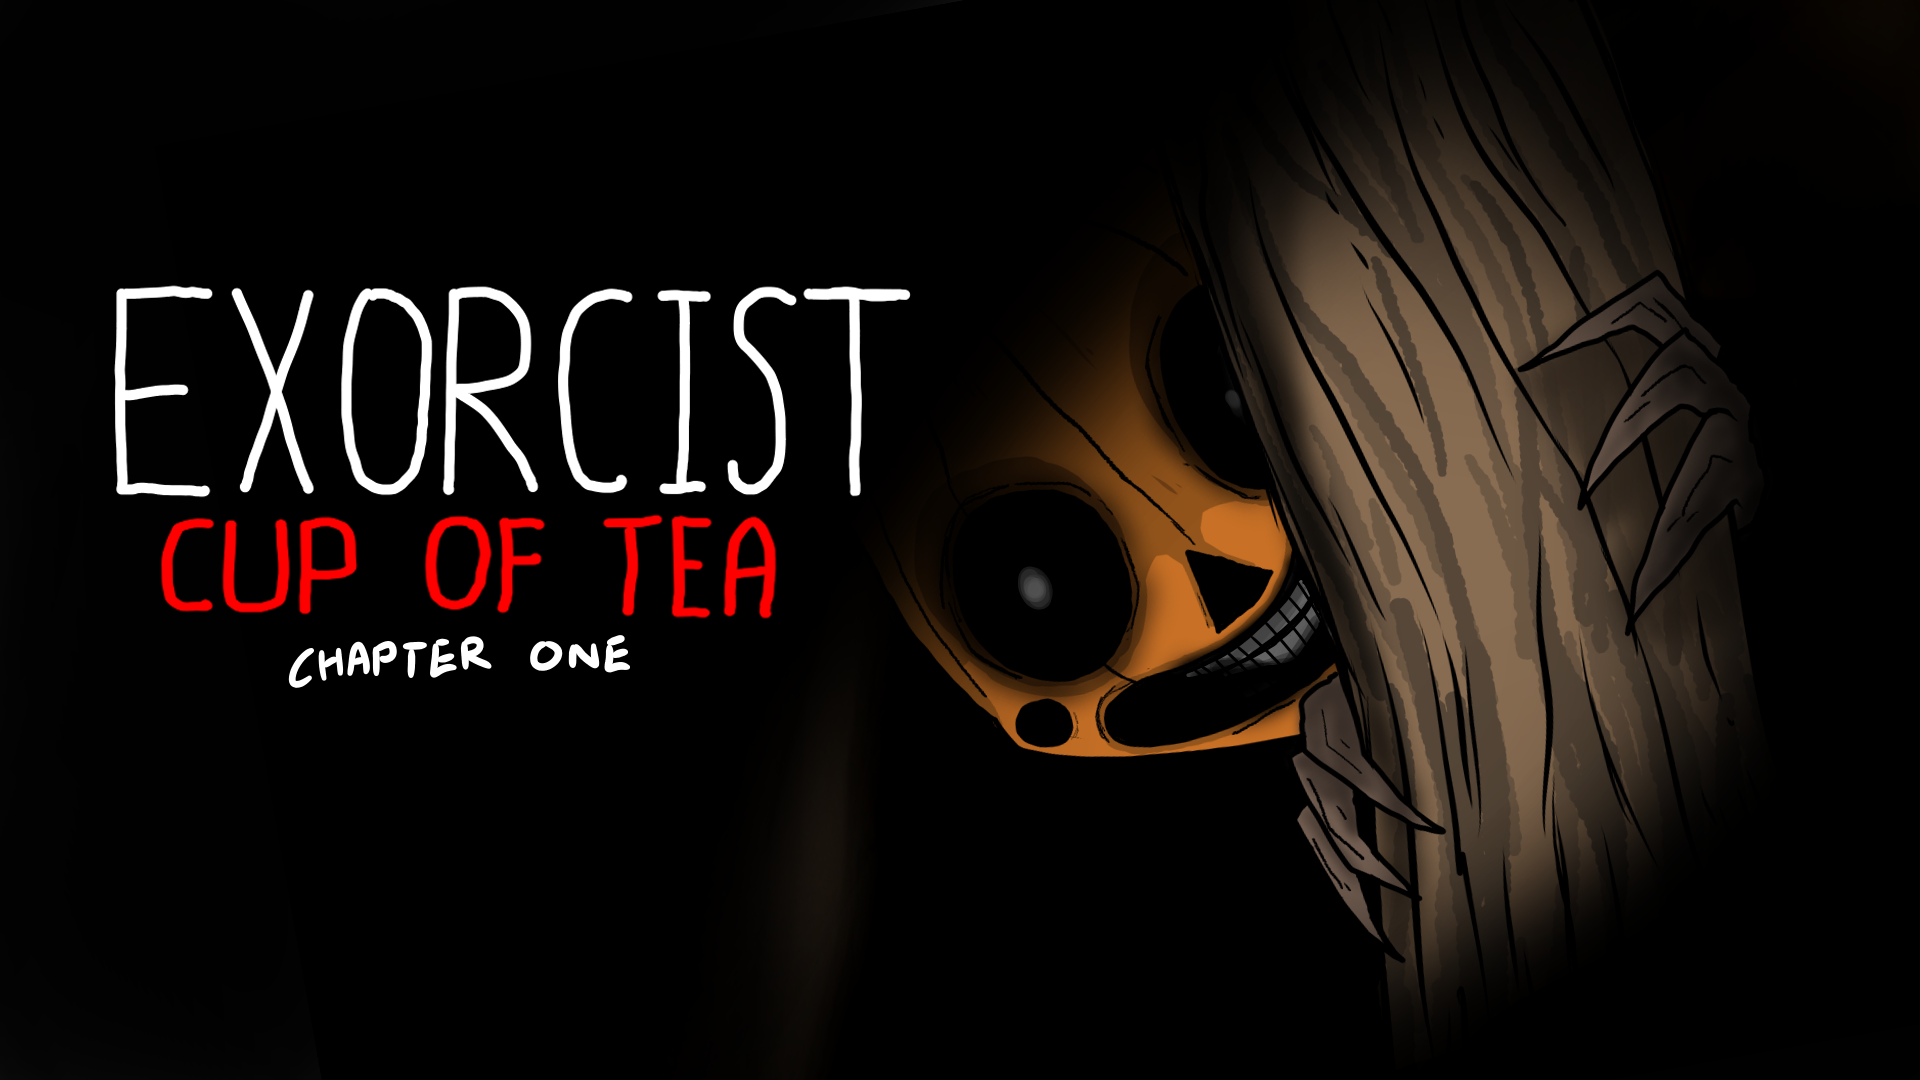 EXORCIST CUP OF TEA (chapter one)